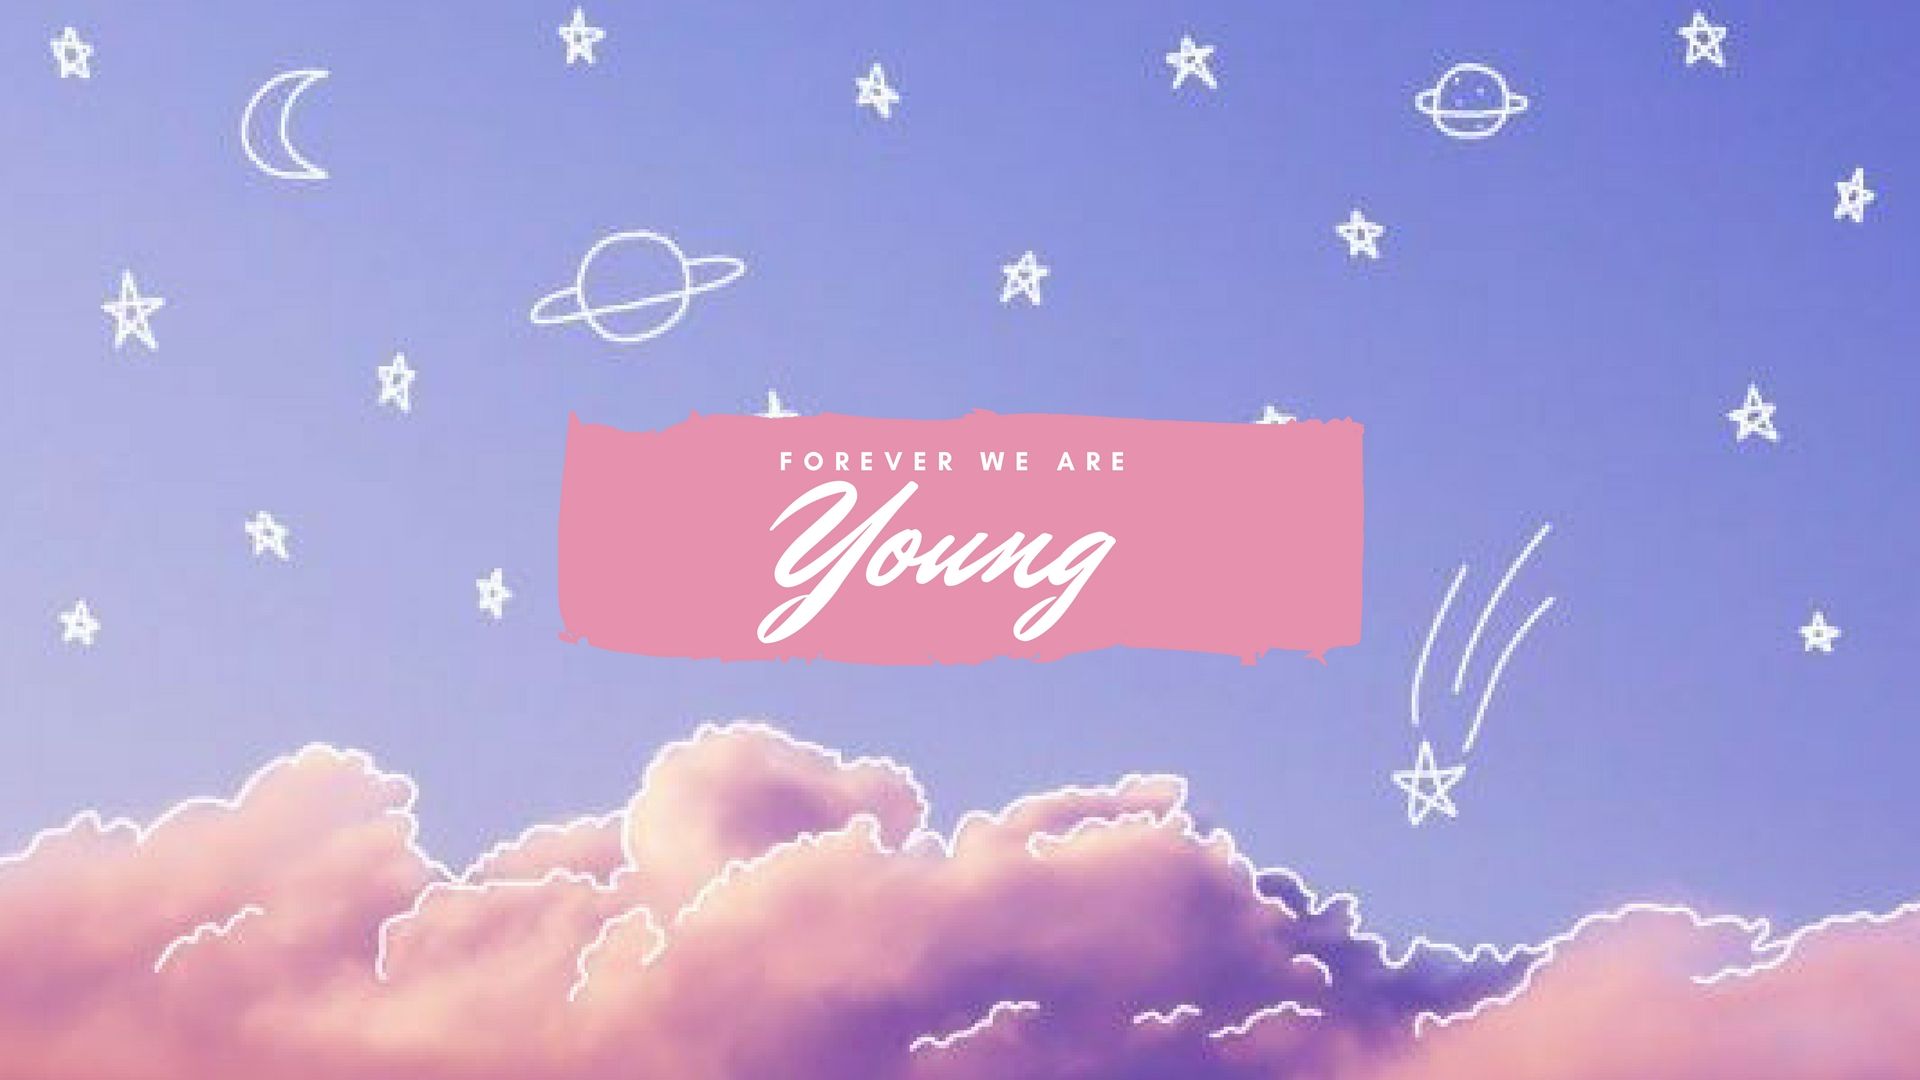 Forever We Are Young Bts Wallpaper For Desktop Puter